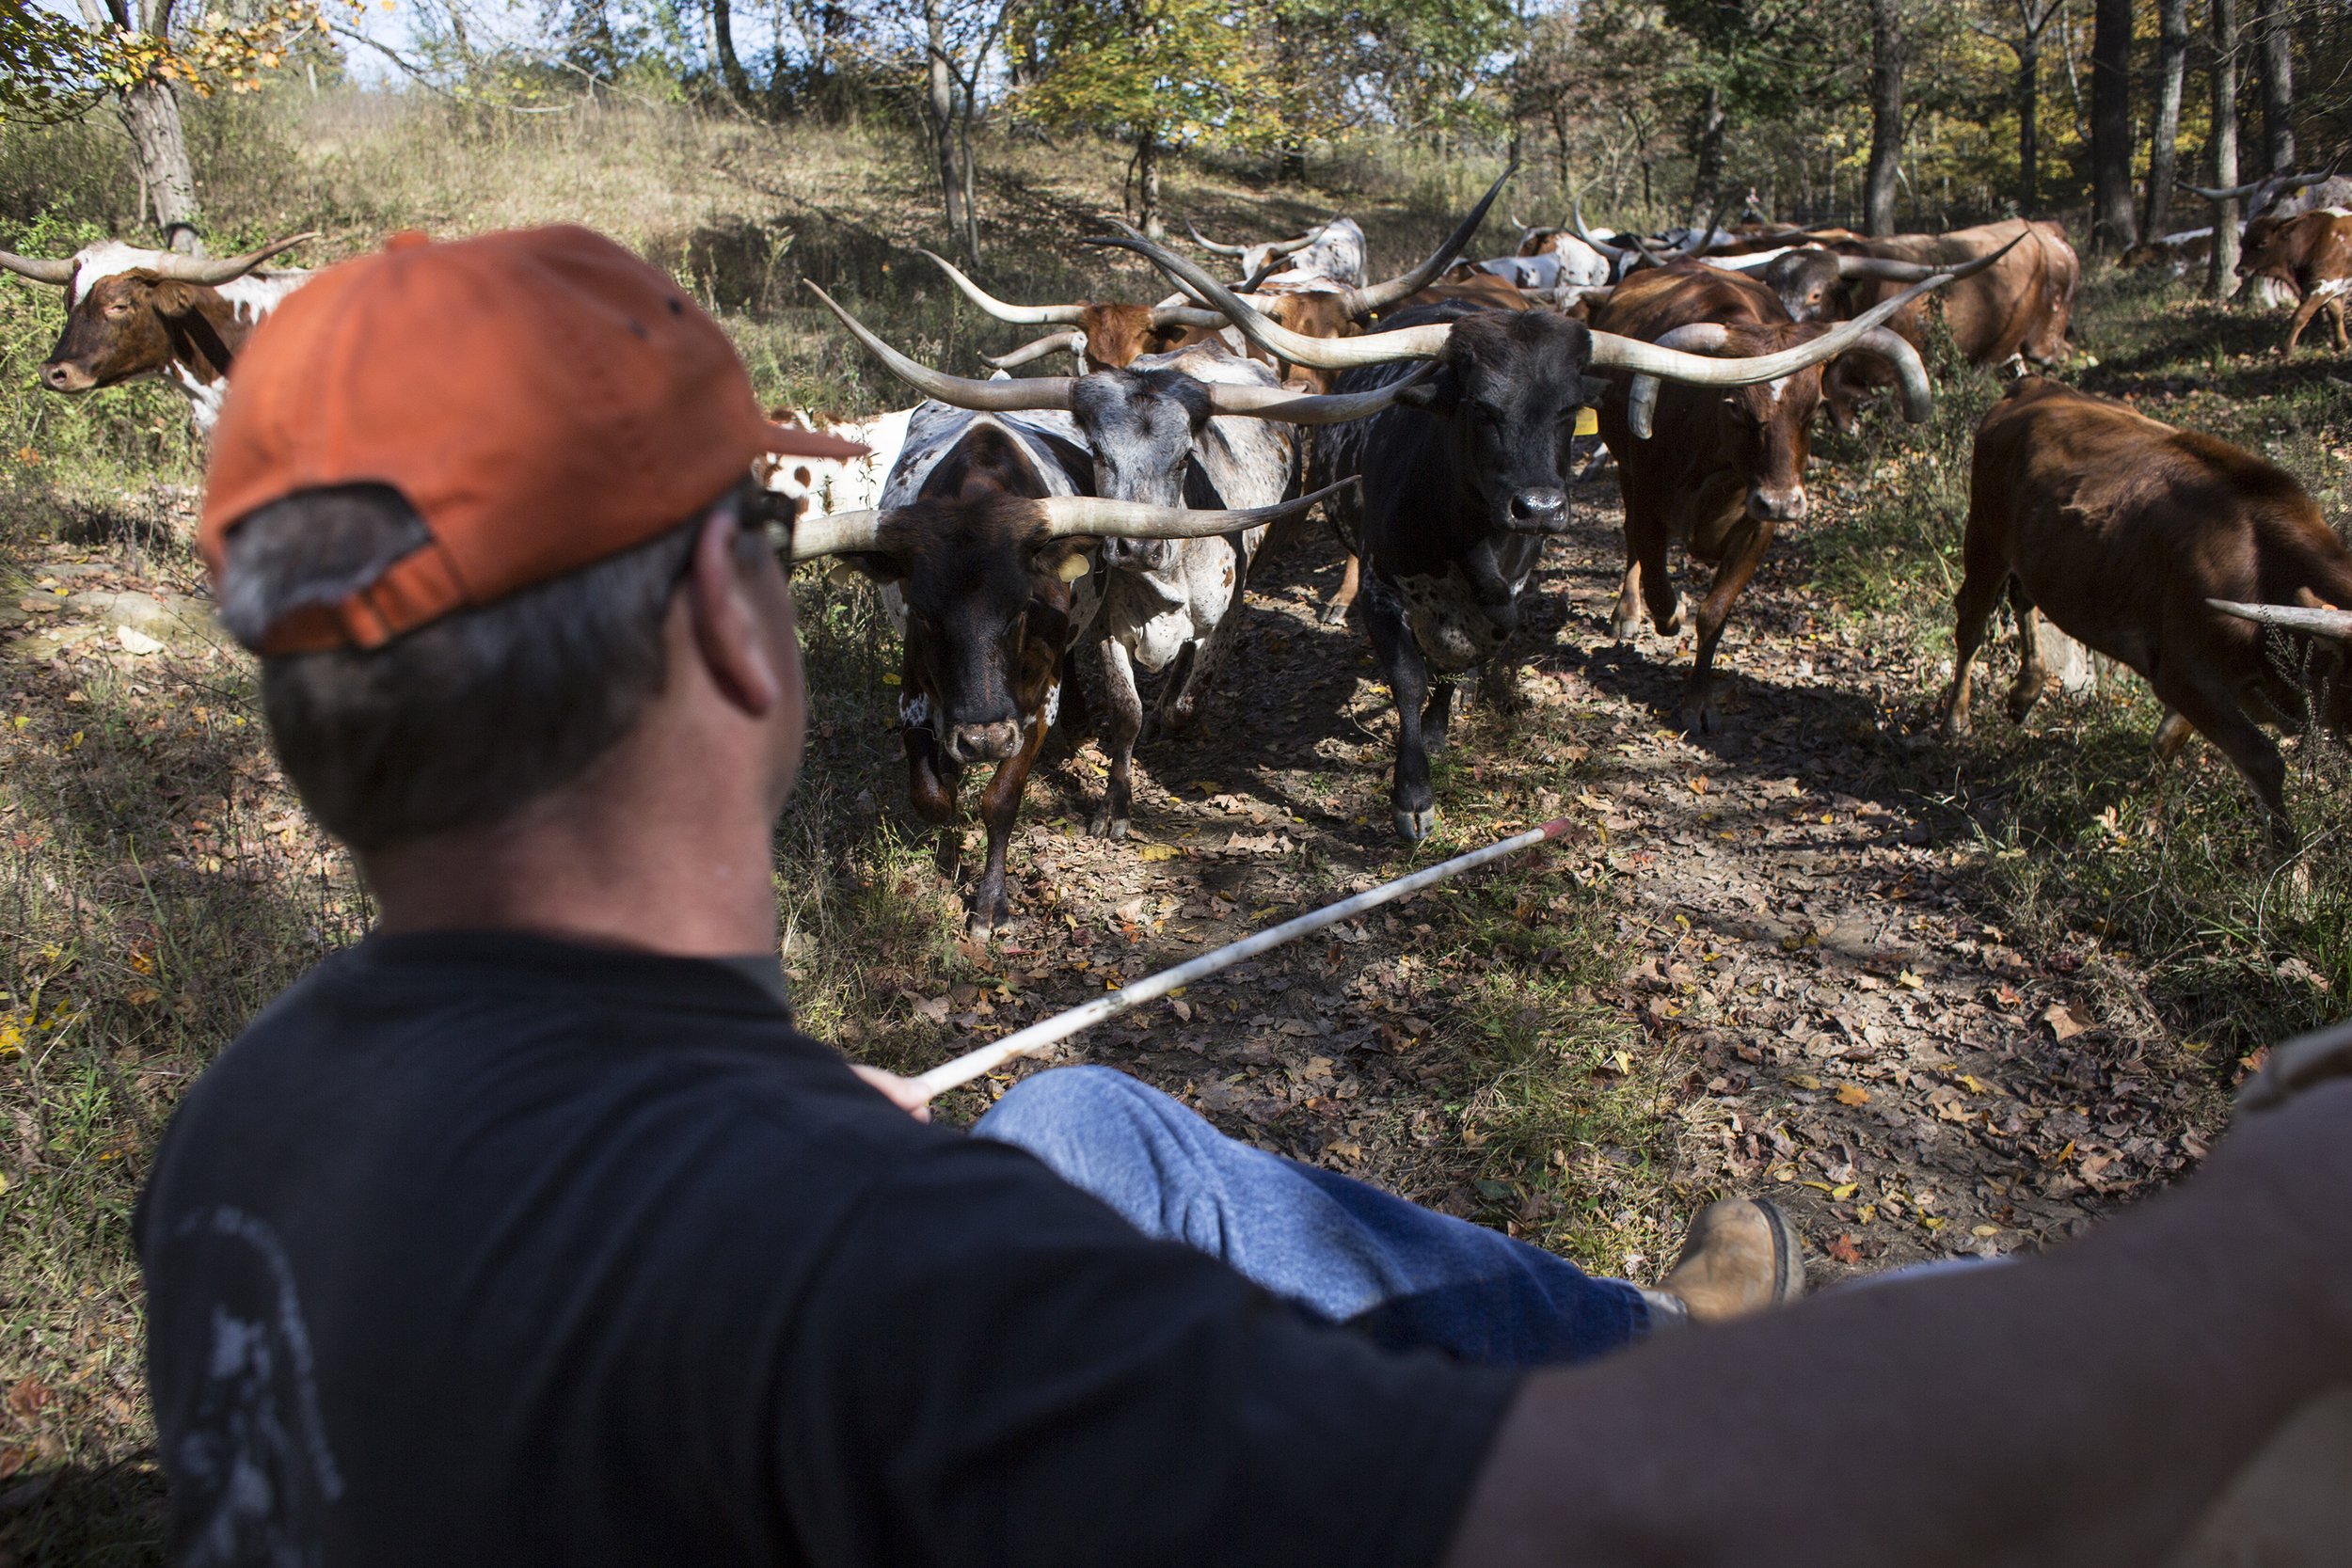  Paul Kozlowski of La Porte helped herd cattle to the barn area Oct. 26 at Wild Serenade Ranch in Stendal, Indiana.  